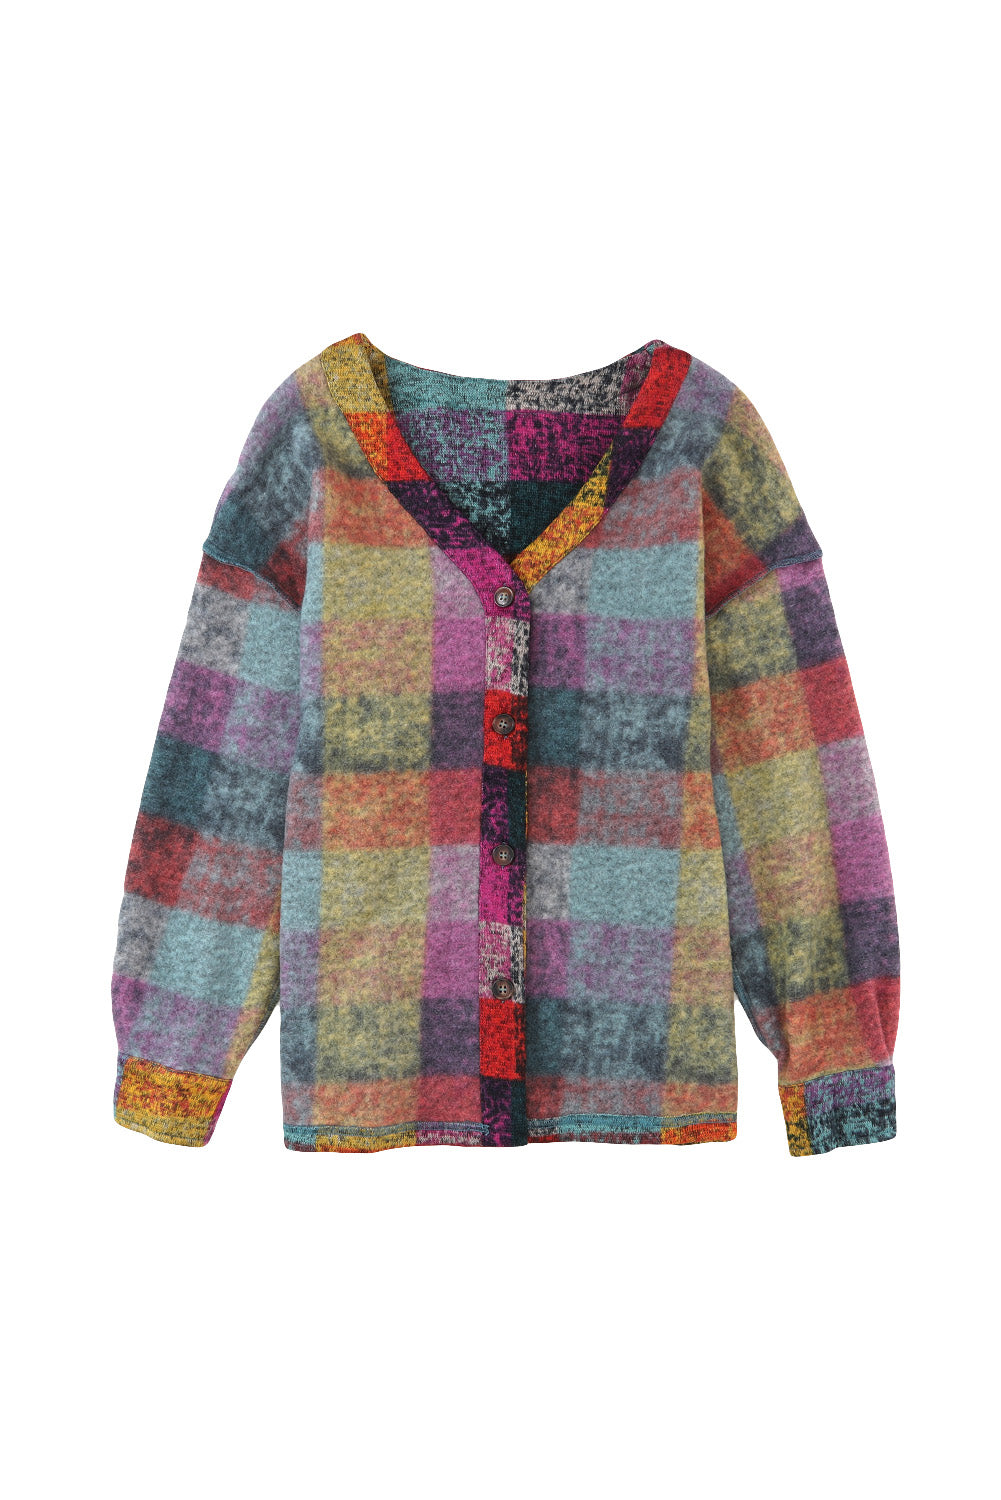 a child's sweater with a colorful plaid pattern